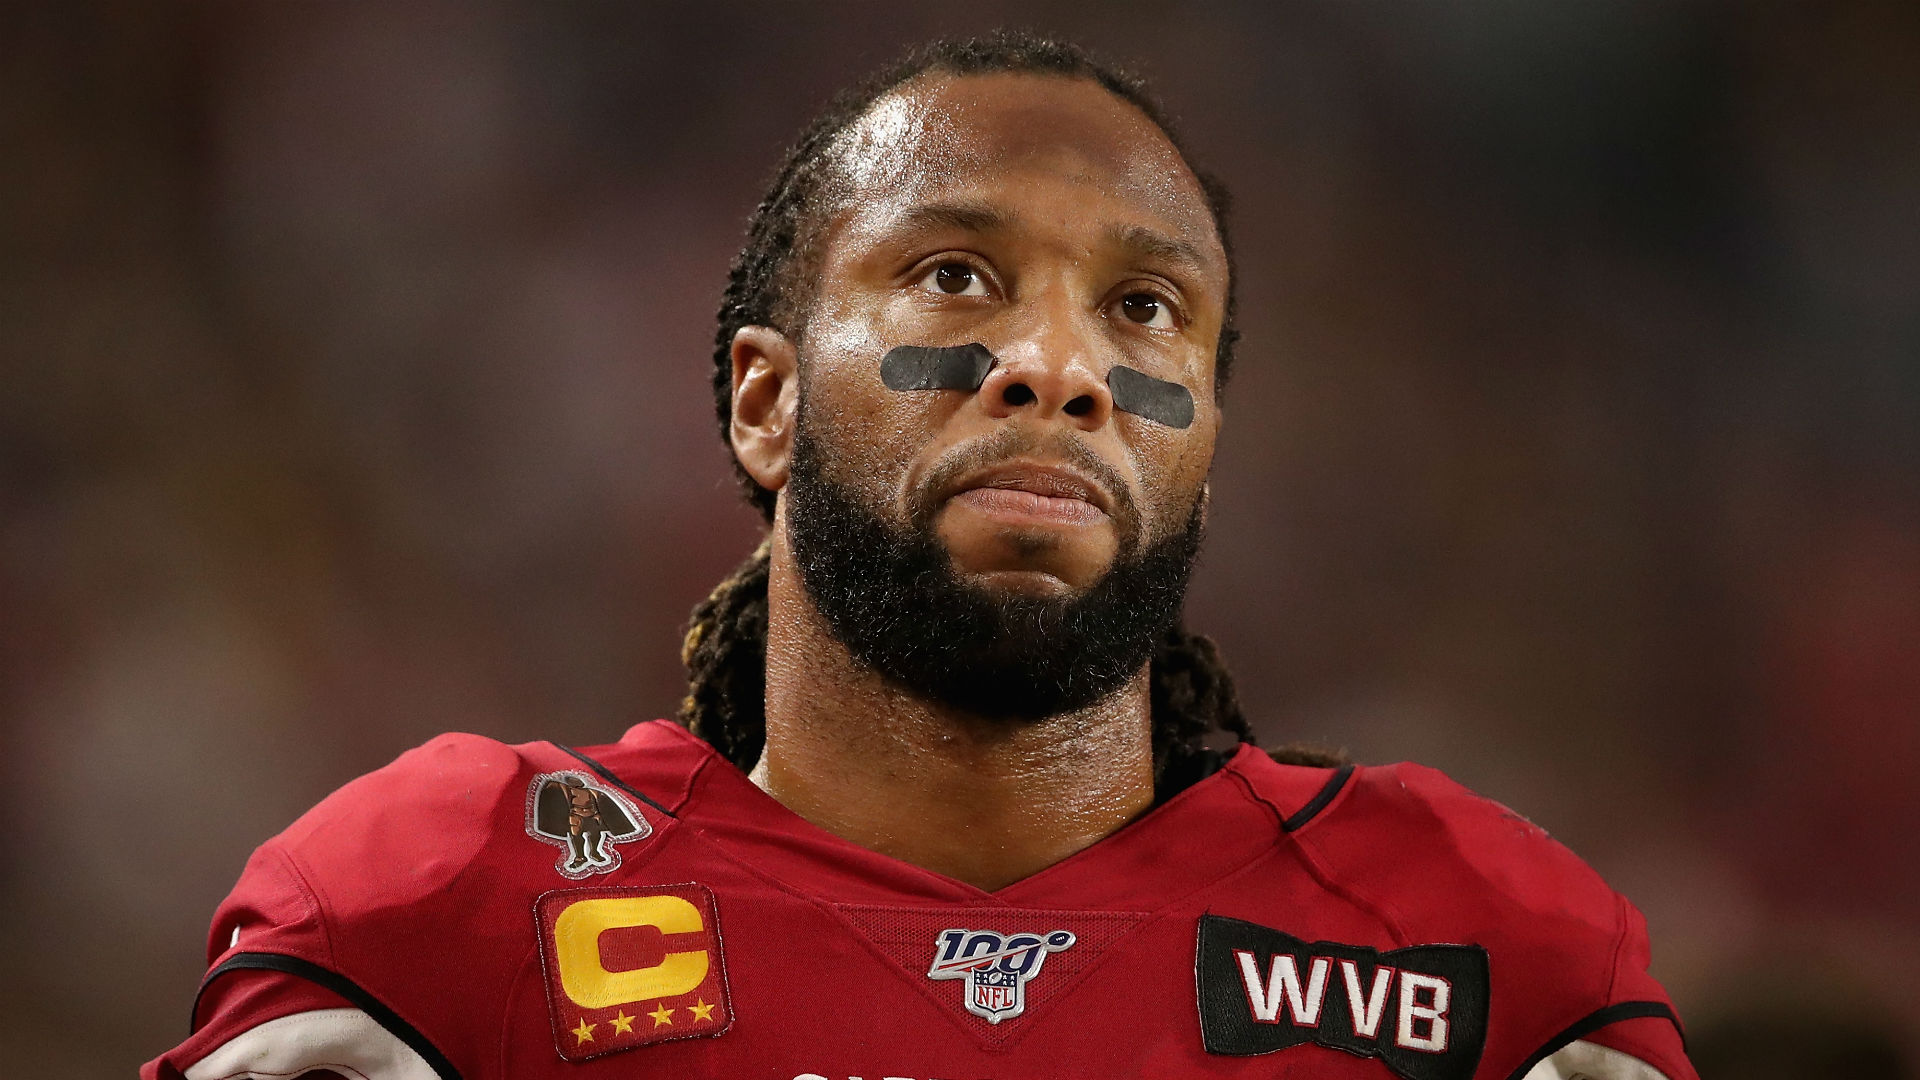 Though he will turn 37 in August, Larry Fitzgerald has signed a new deal to remain with the Arizona Cardinals for next season.